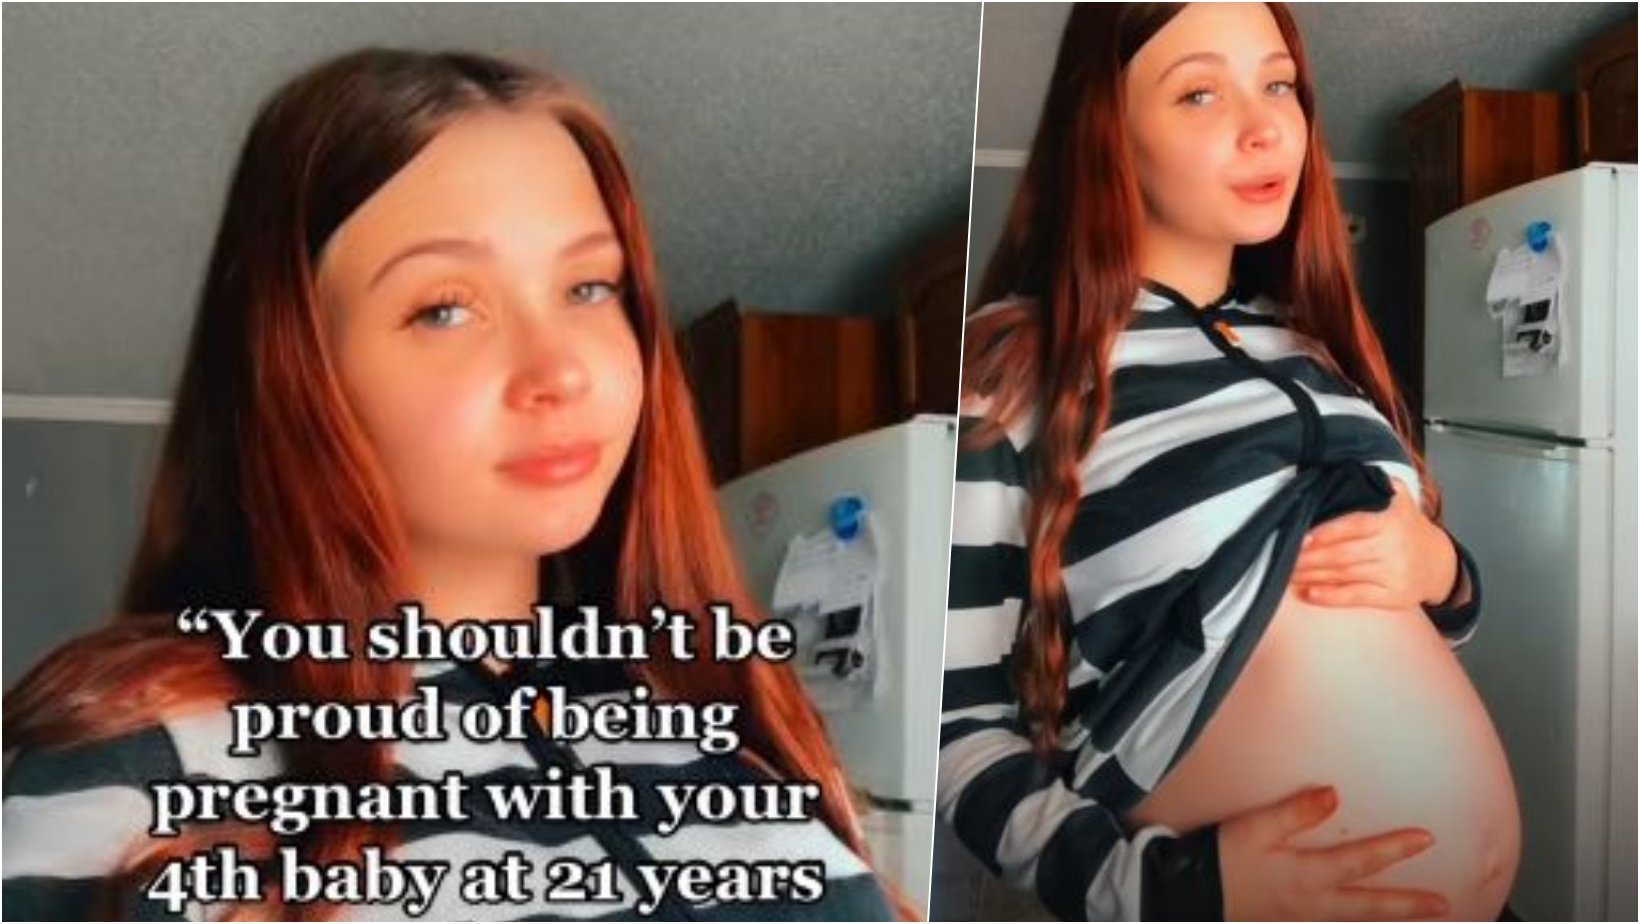 6 facebook cover 31.jpg?resize=1200,630 - 21-Year-Old Mom Claps Back At Haters And Says She Is Ready To Welcome Her 4th Child, Adding That She’s Proud Of It